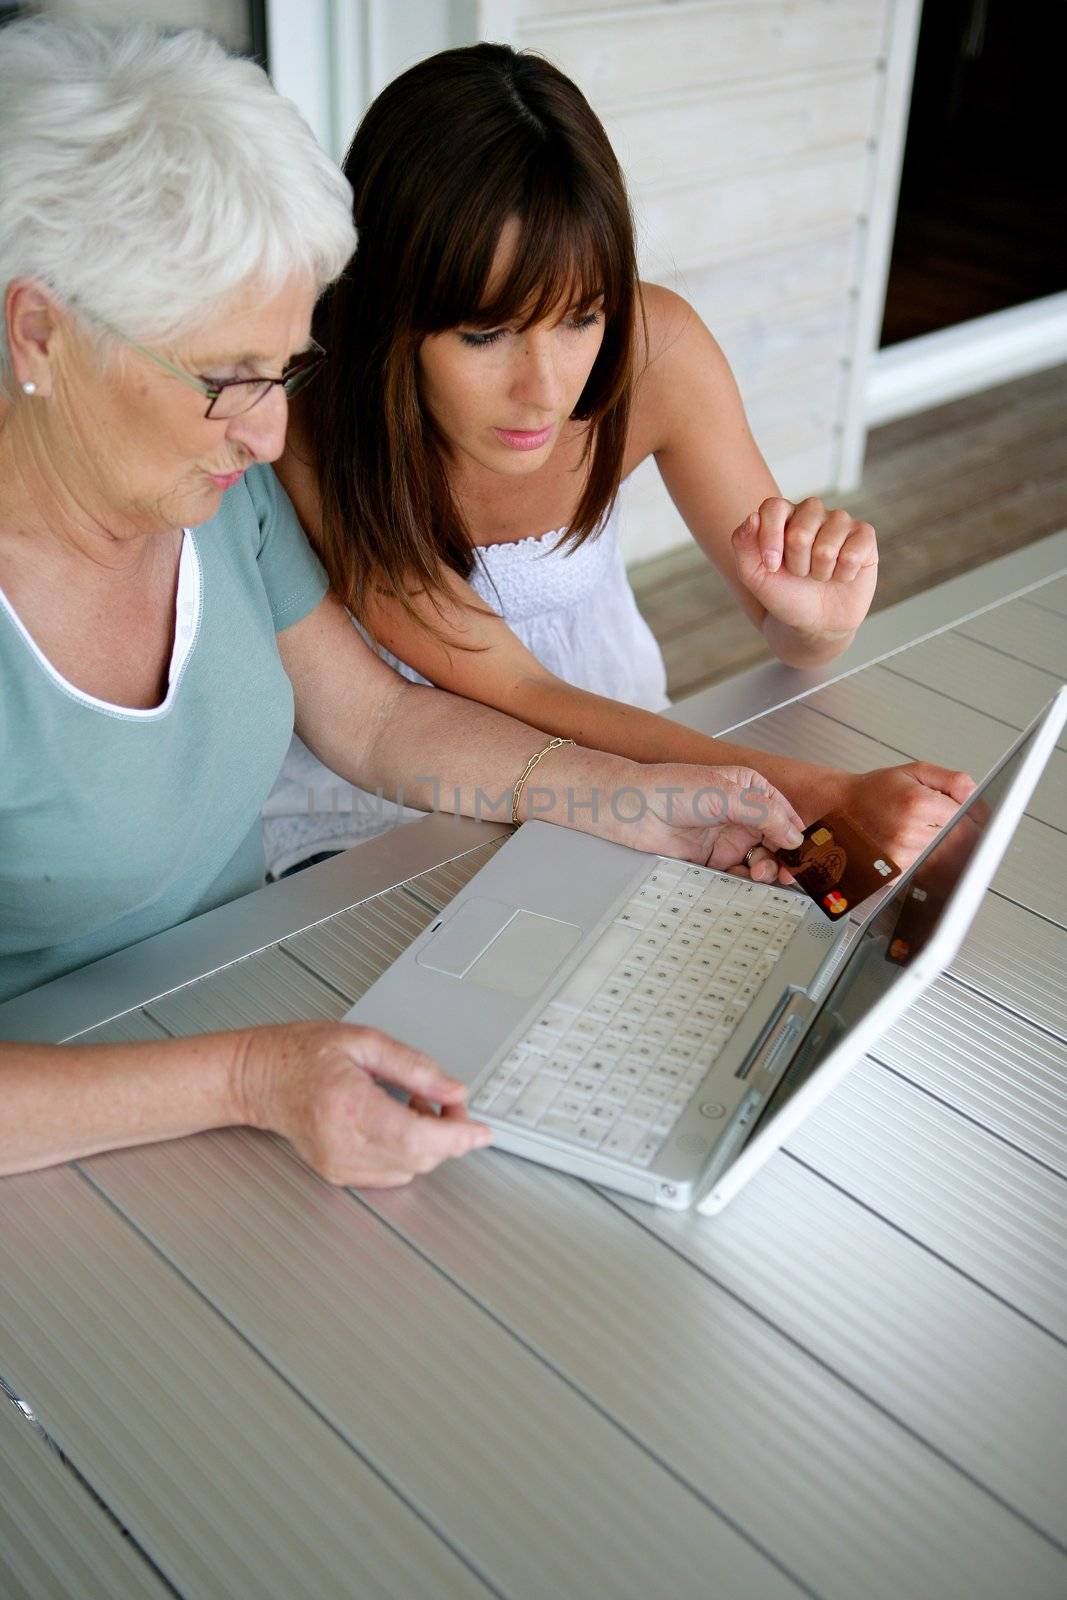 Young woman teaching her grandmother computer skills